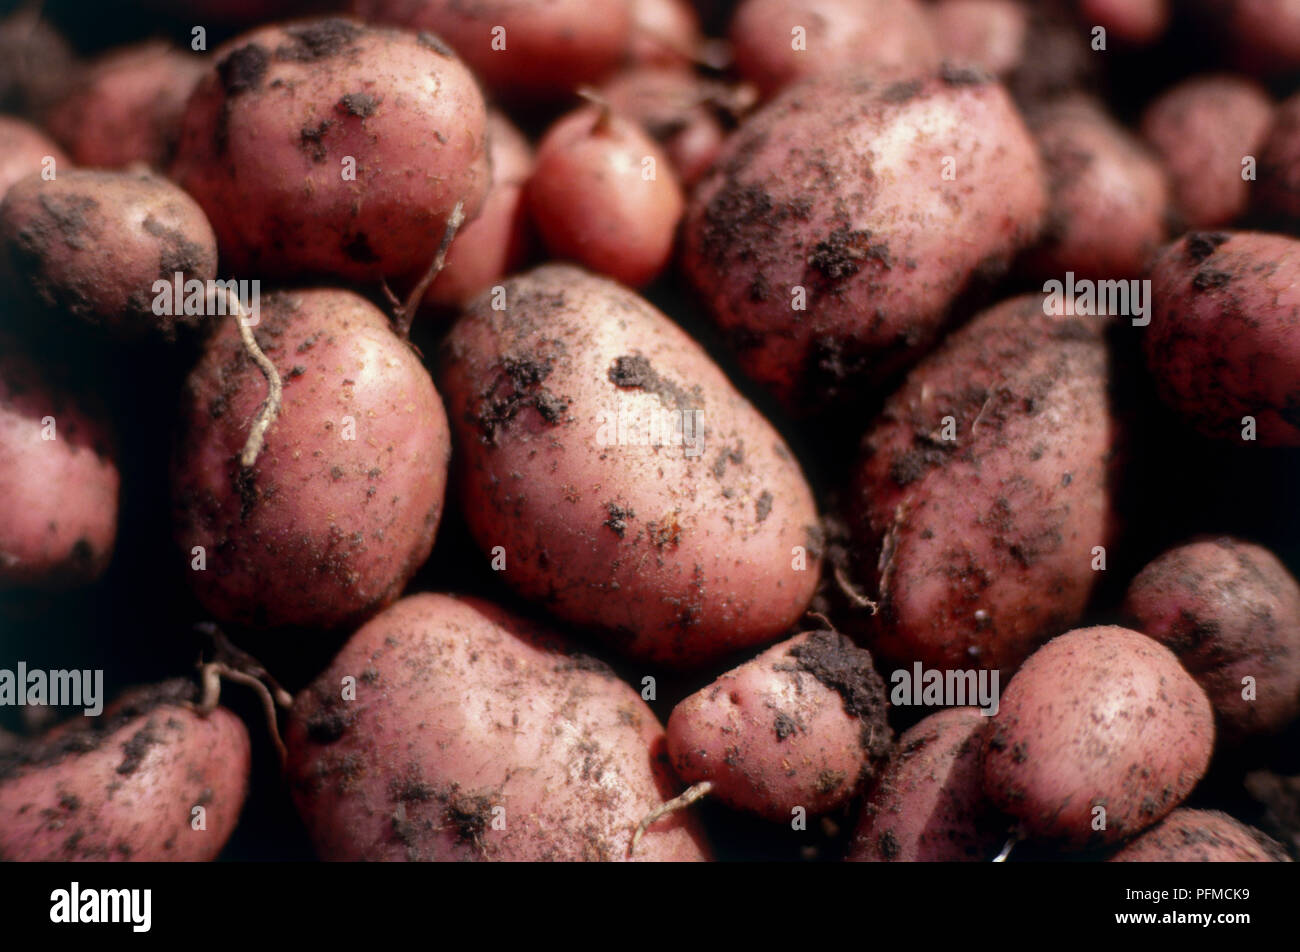 Freshly harvested organic red potatoes with soil on the skins, close-up Stock Photo